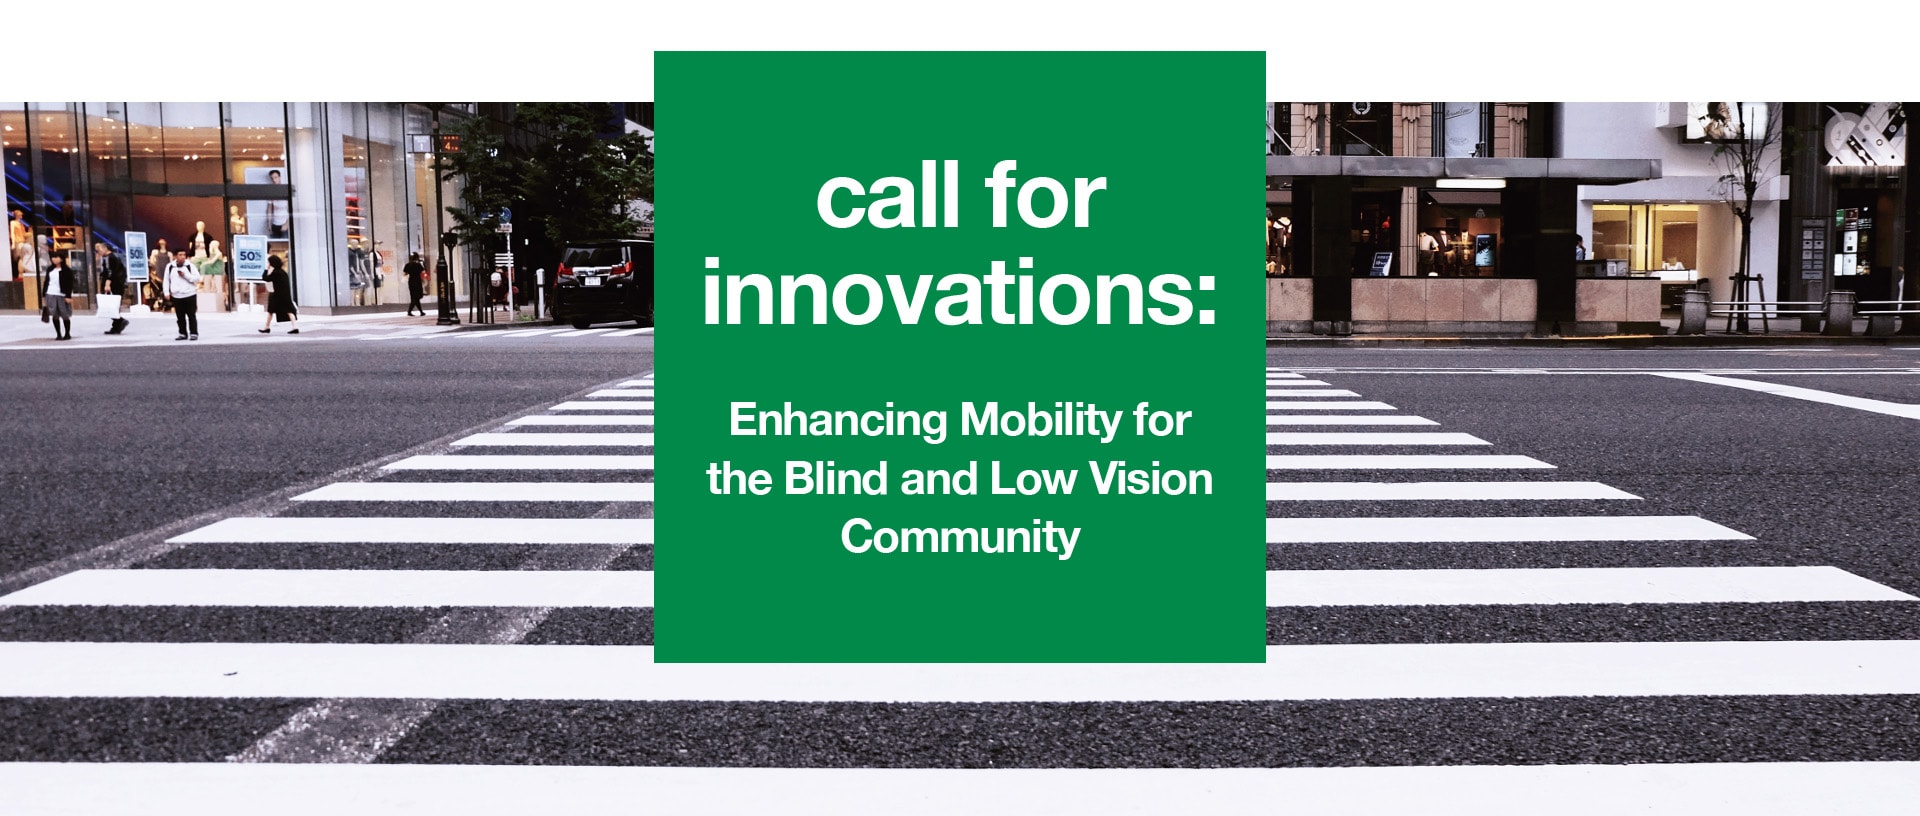 Header Image of black and white pedestrian crosswalk with green overlay displaying white text on green background that reads Call for Innovations: Enhancing Mobility for the Blind and Low Vision Community